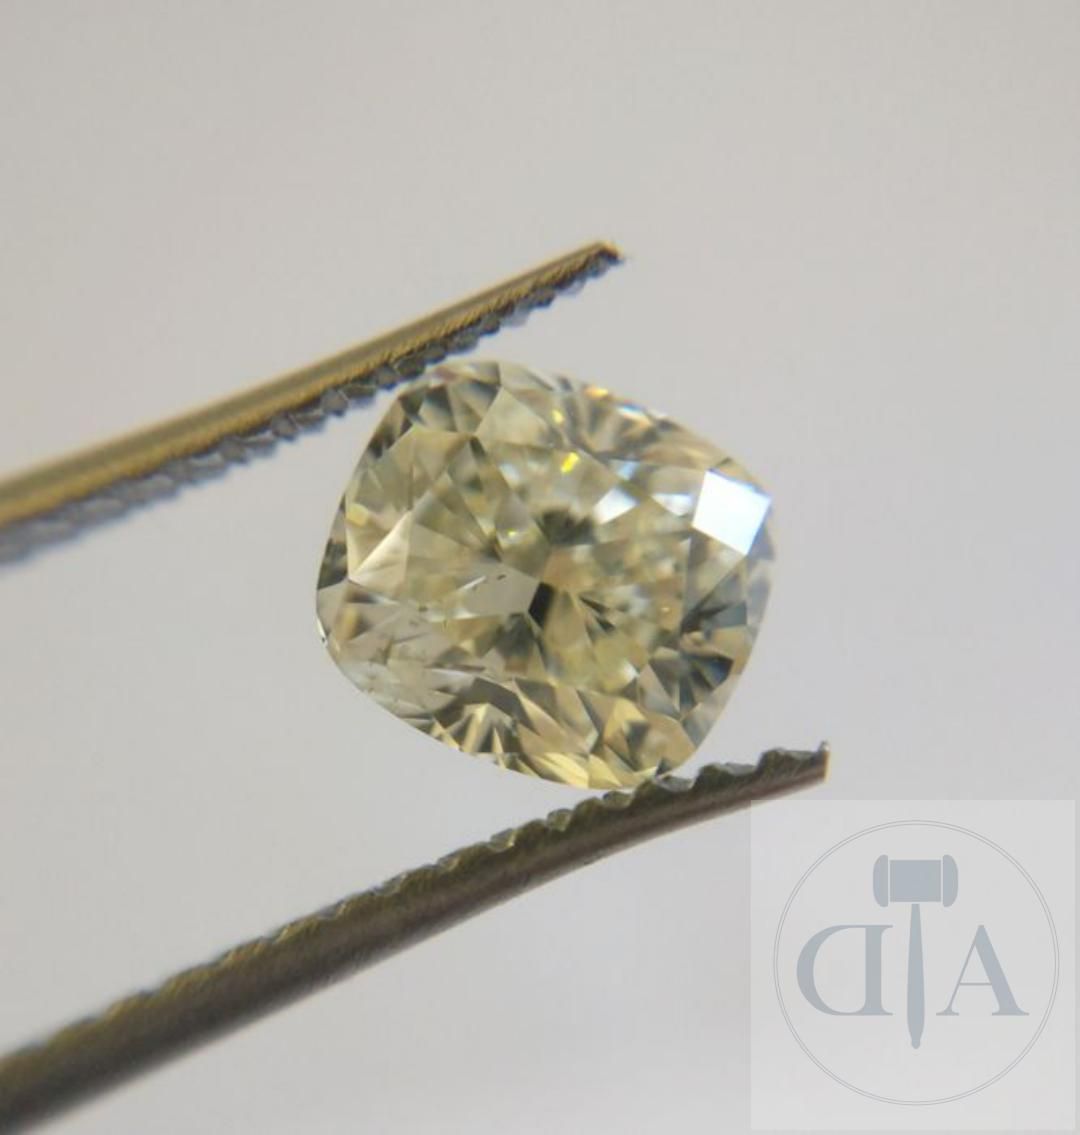 Null "Diamond 1.41ct GIA Certified- GIA Certificate No. 1162789891 
- Shape: Cus&hellip;